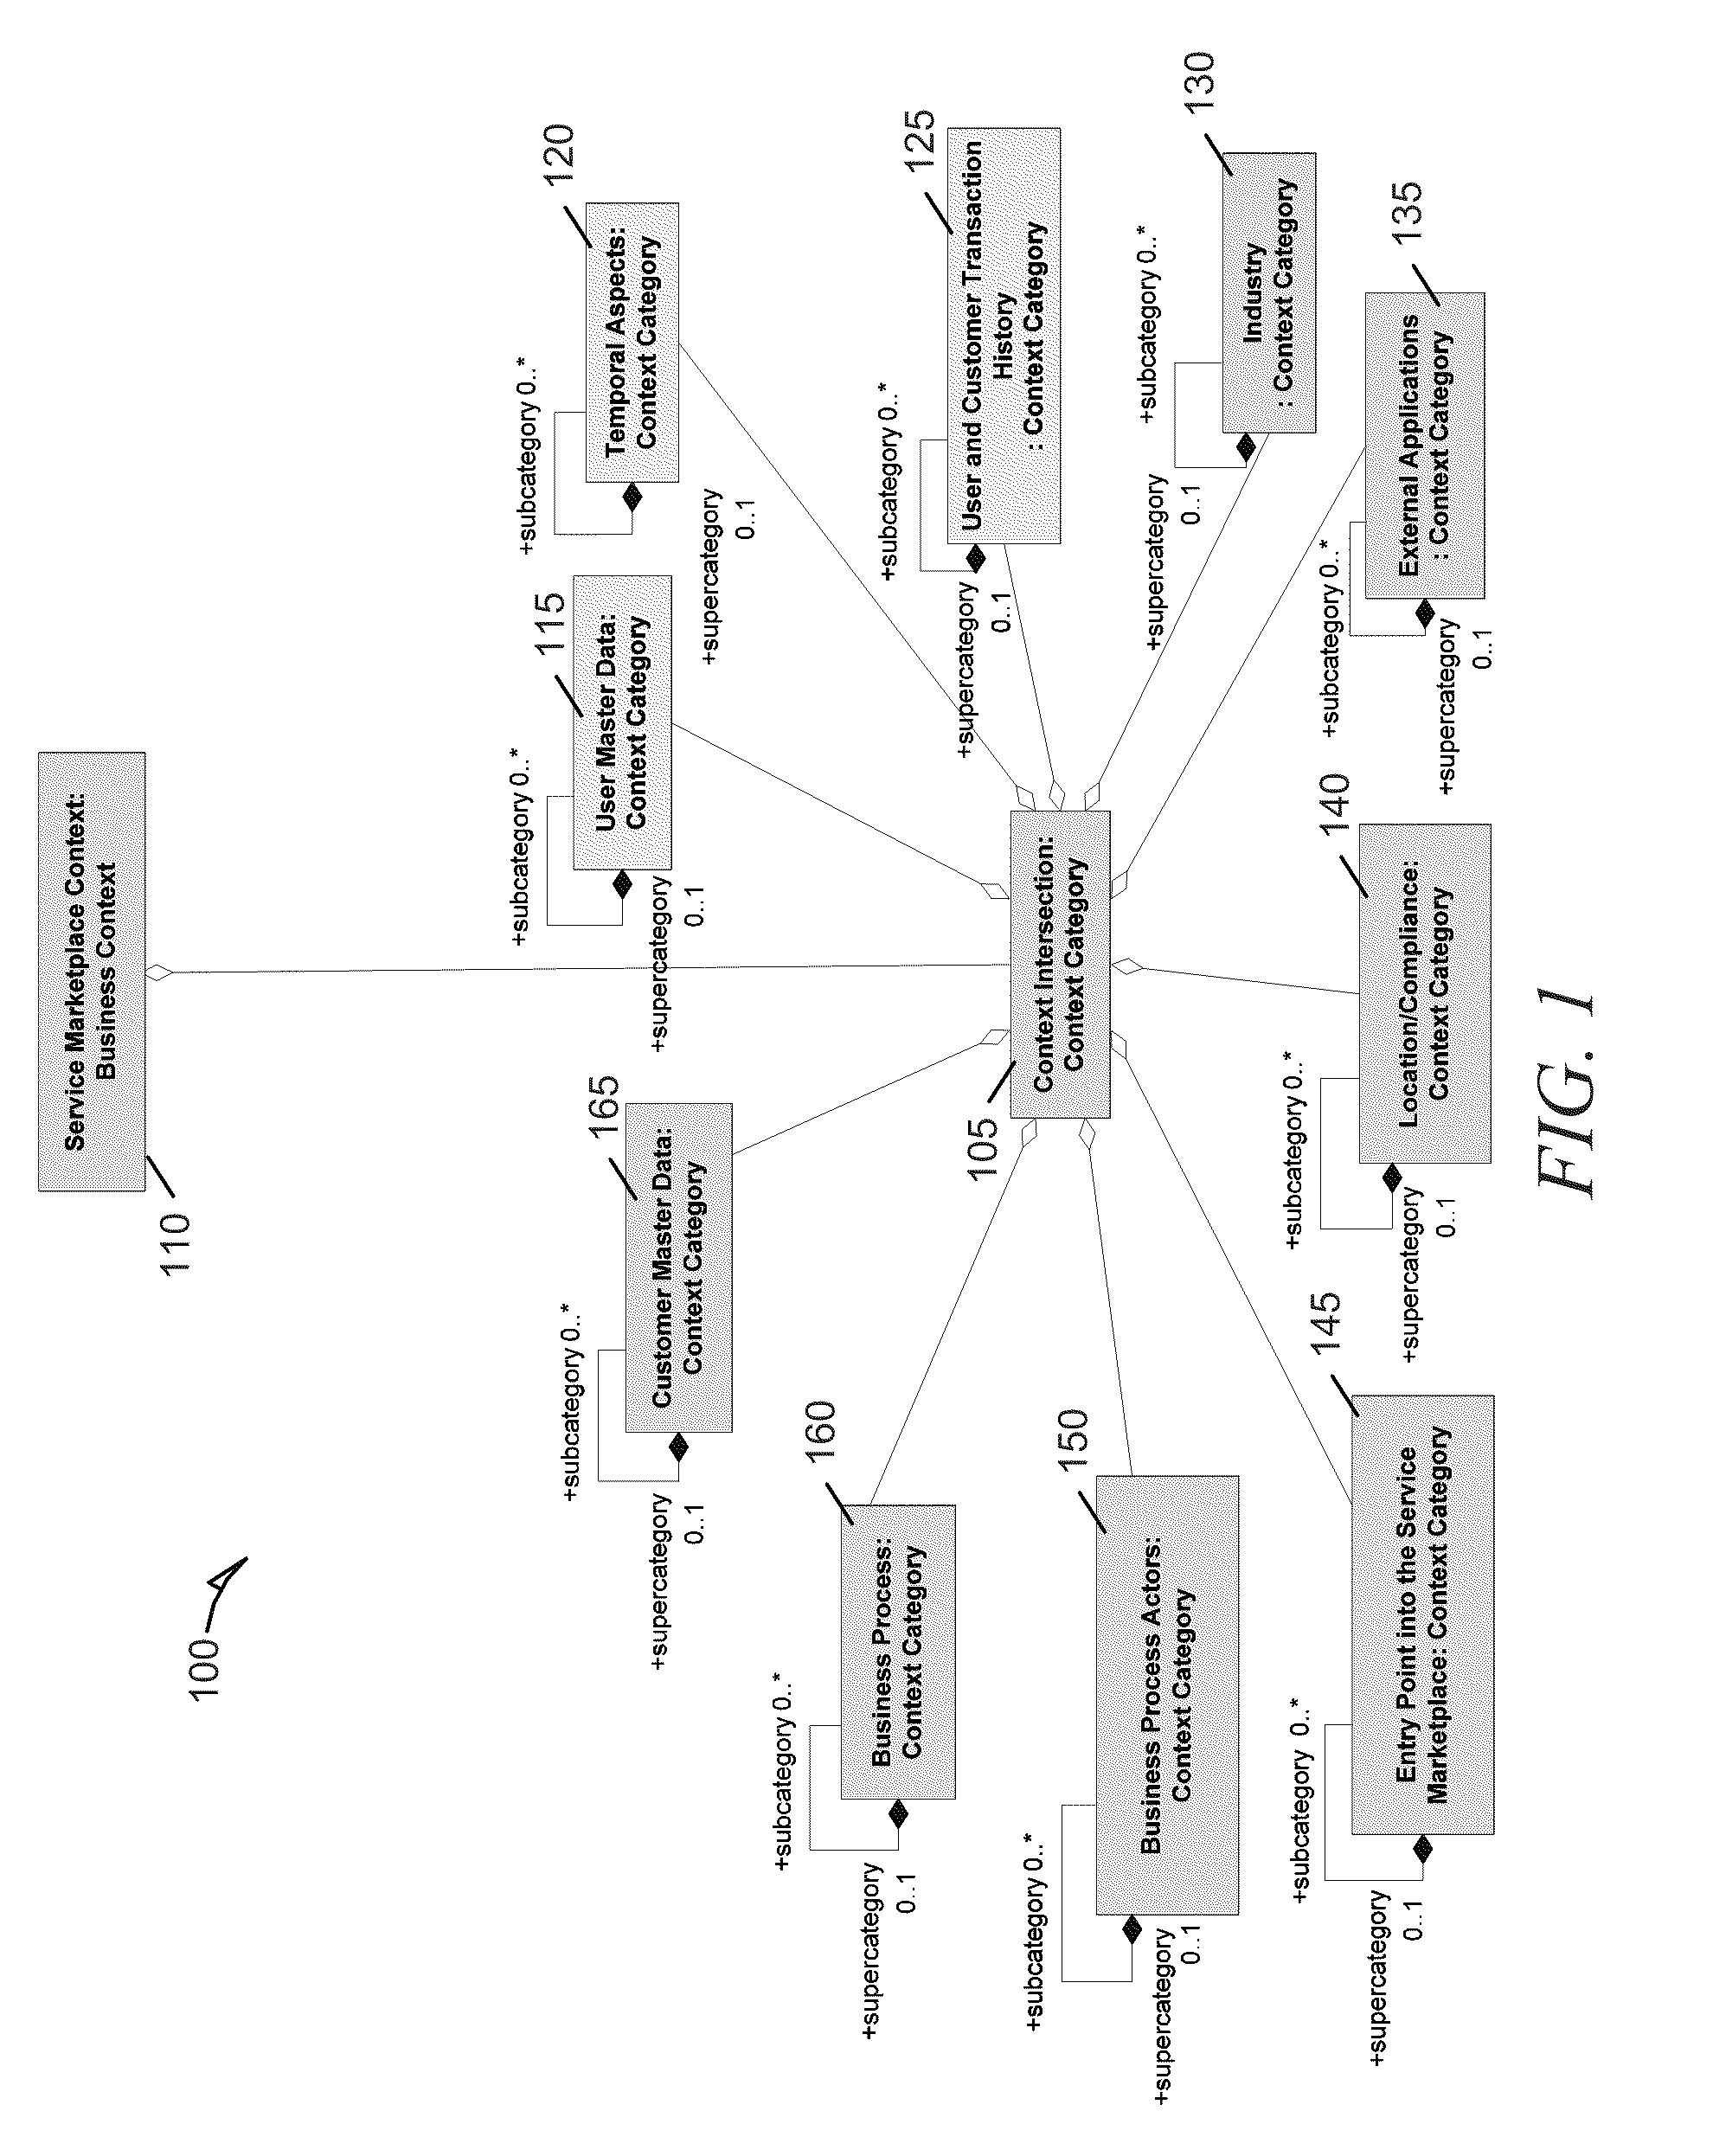 Systems and methods for dynamic process model configuration based on process execution context